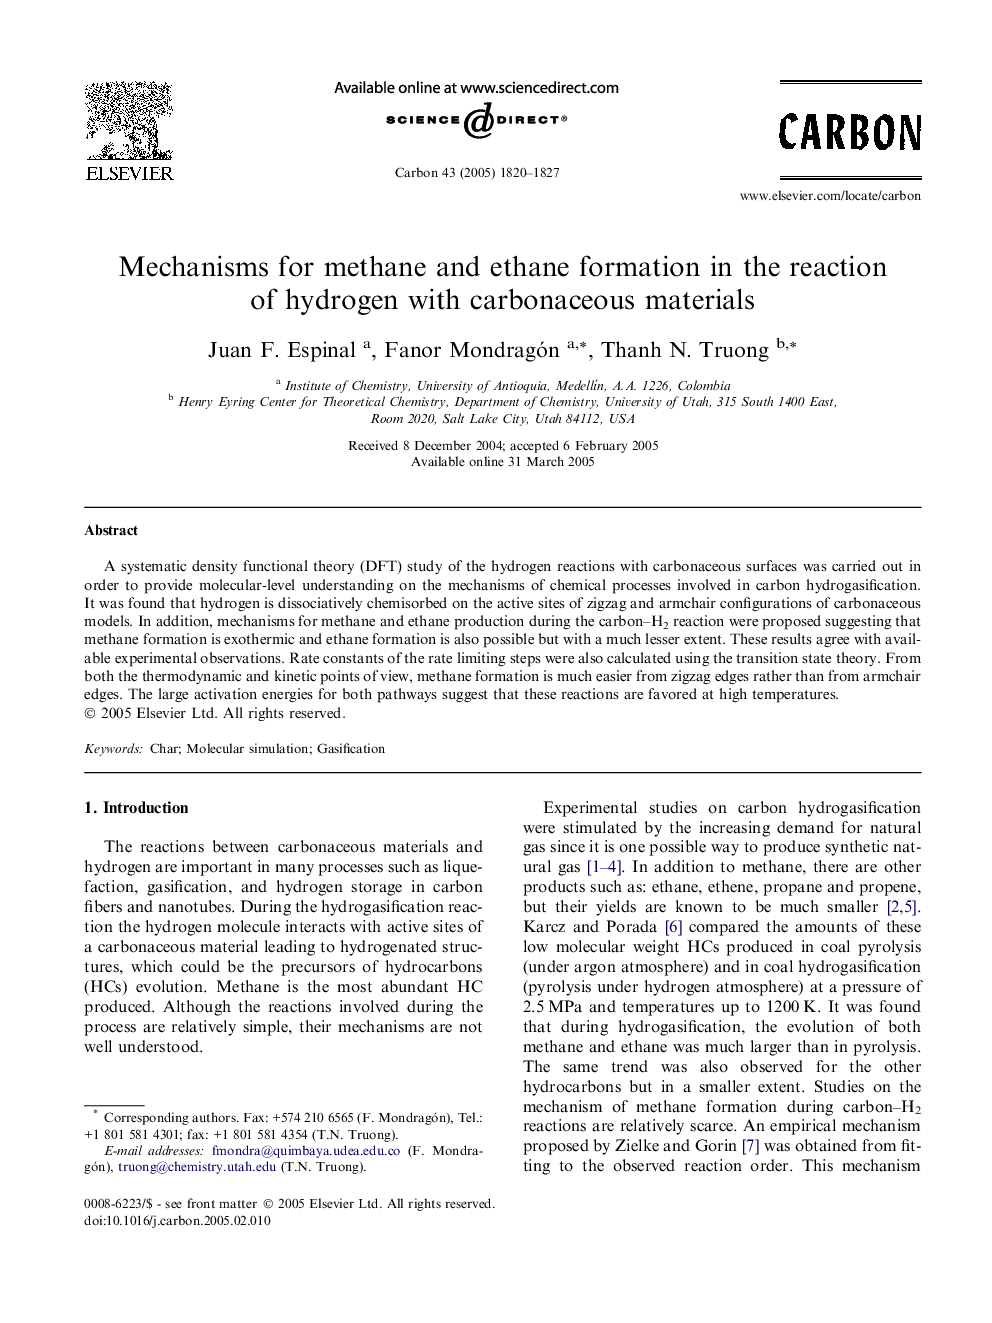 Mechanisms for methane and ethane formation in the reaction of hydrogen with carbonaceous materials